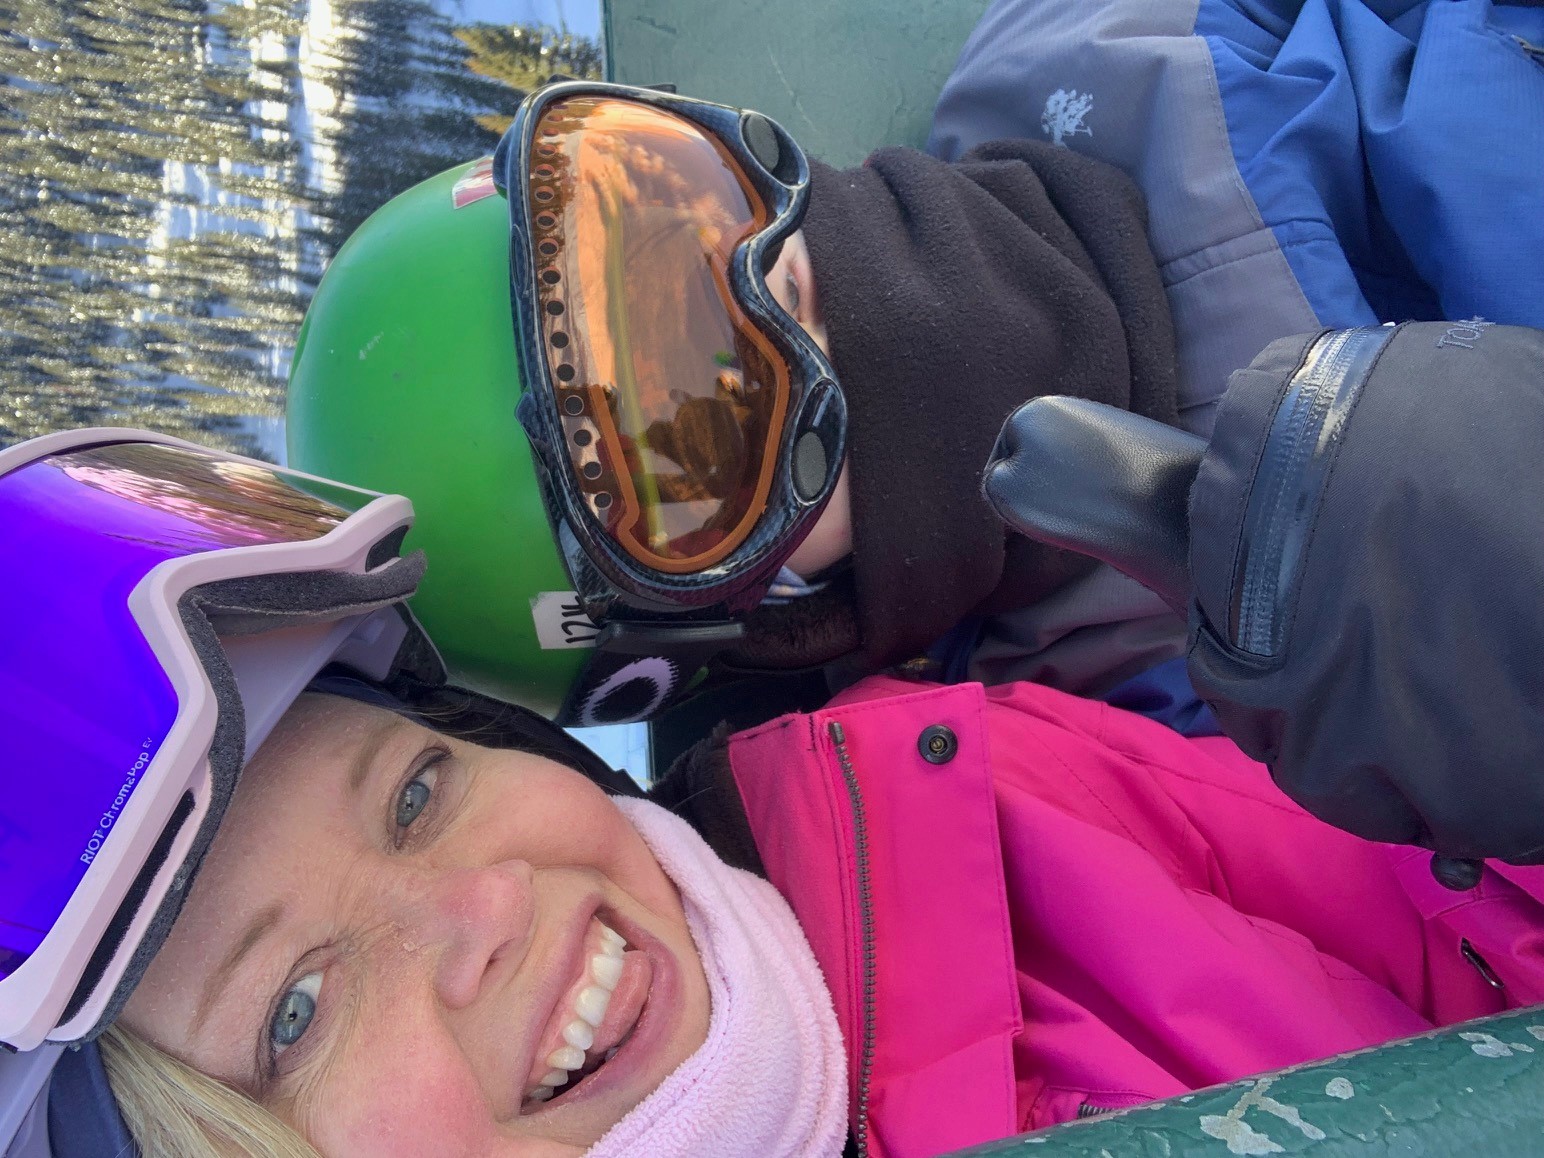 Woman and child sit on chair lift wearing goggles, helmets, and warm clothing. The woman gives a thumbs-up